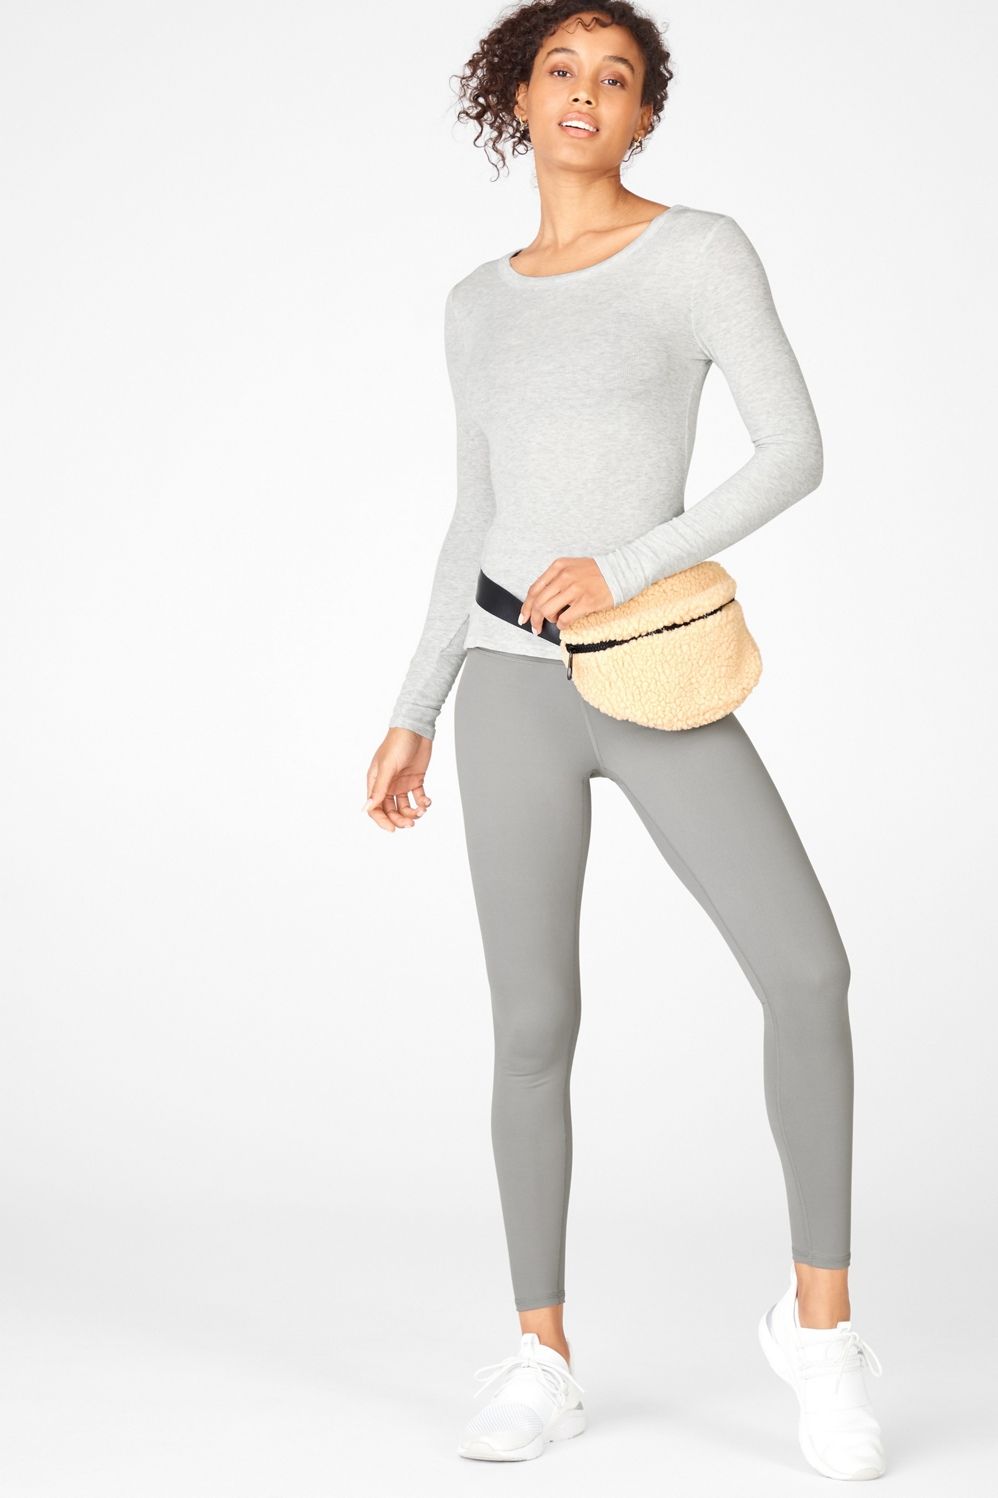 Airy 2-Piece Outfit | Fabletics